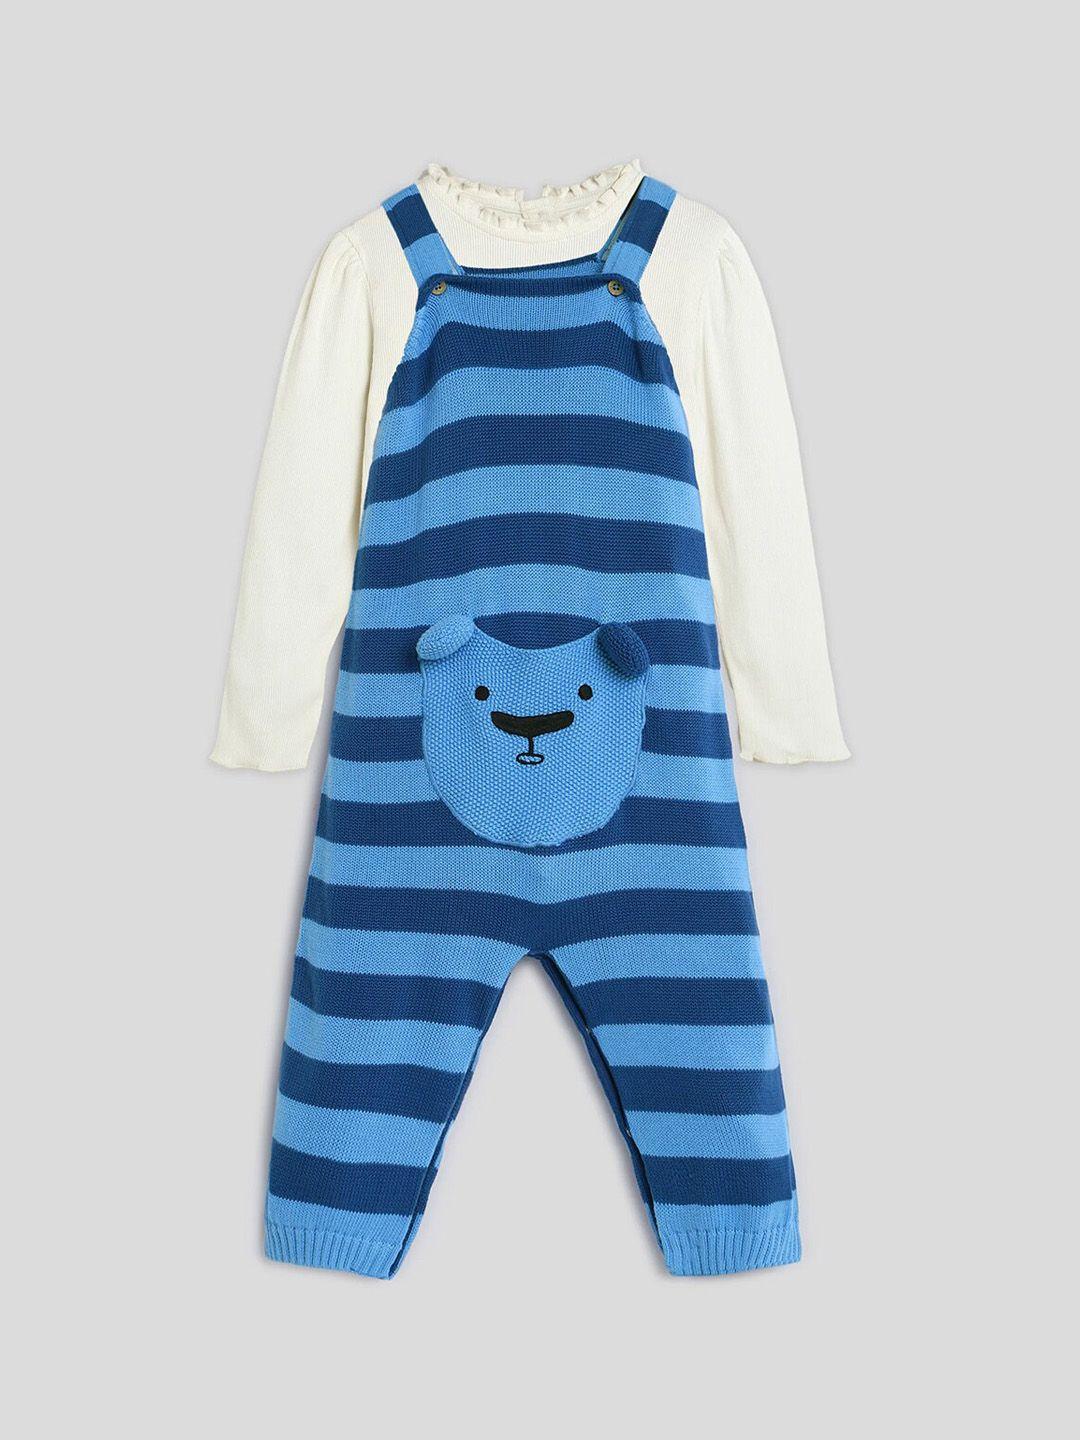 somersault-infant-boys-striped-pure-cotton-romper-with-t-shirt